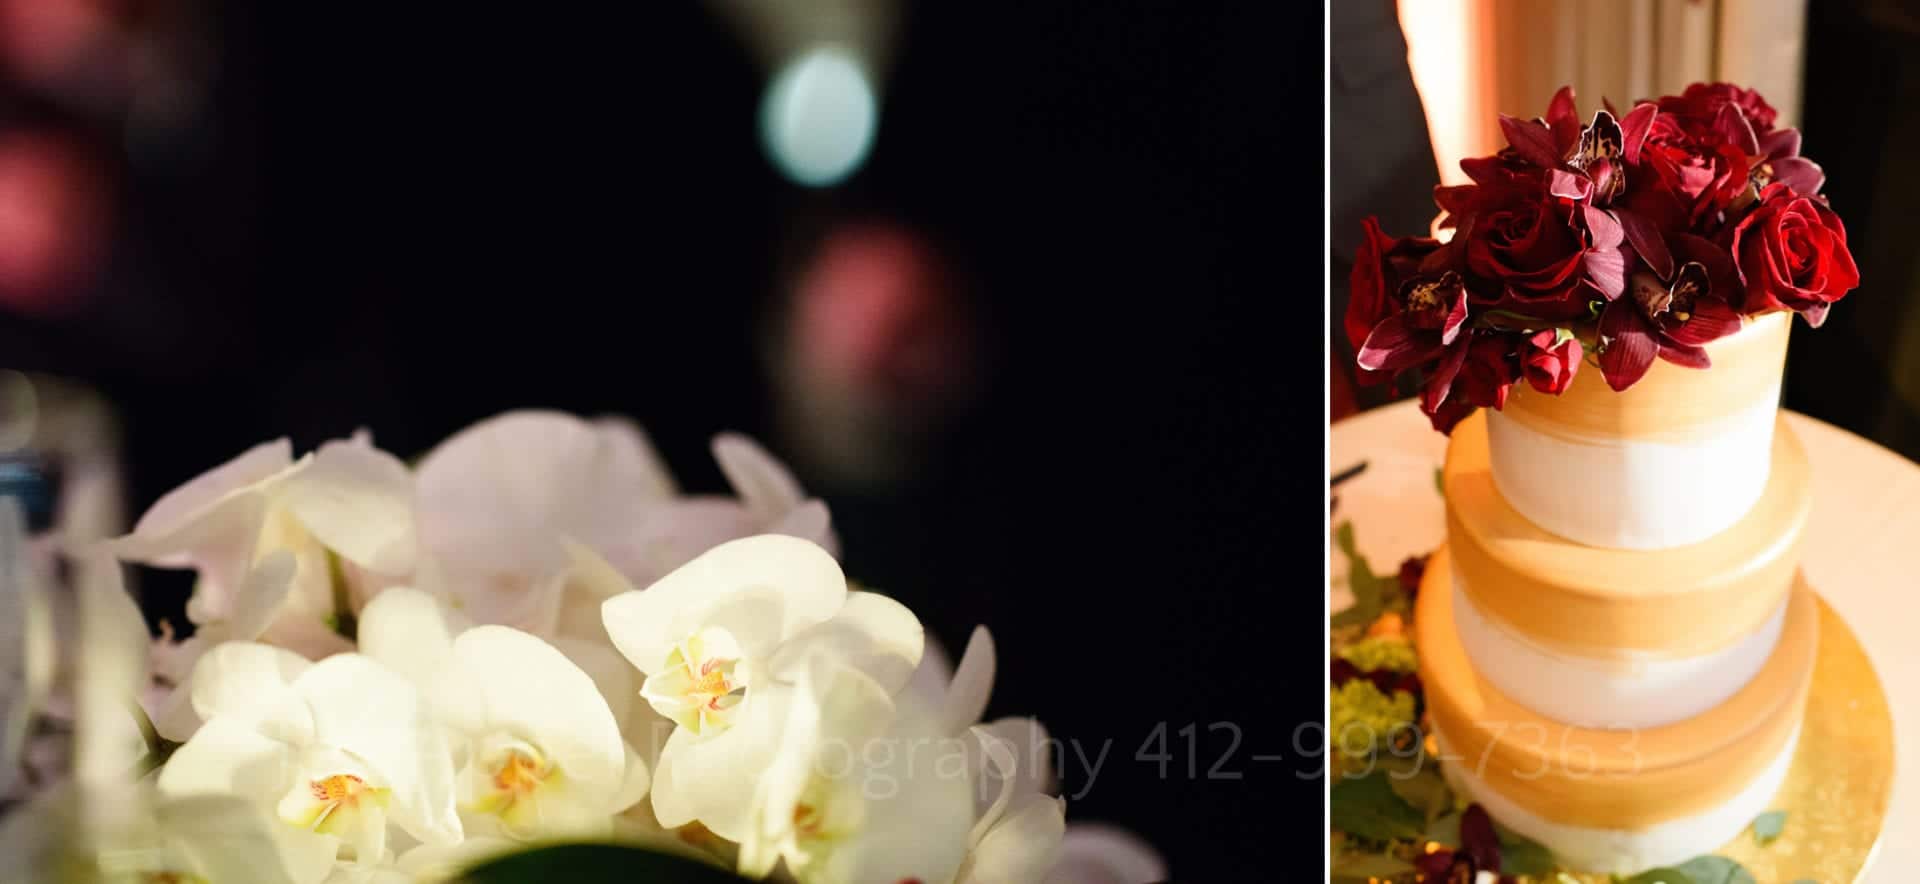 Two photos: A closeup of white orchids on a table centerpiece. The second is a three tiered wedding cake topped by red roses.